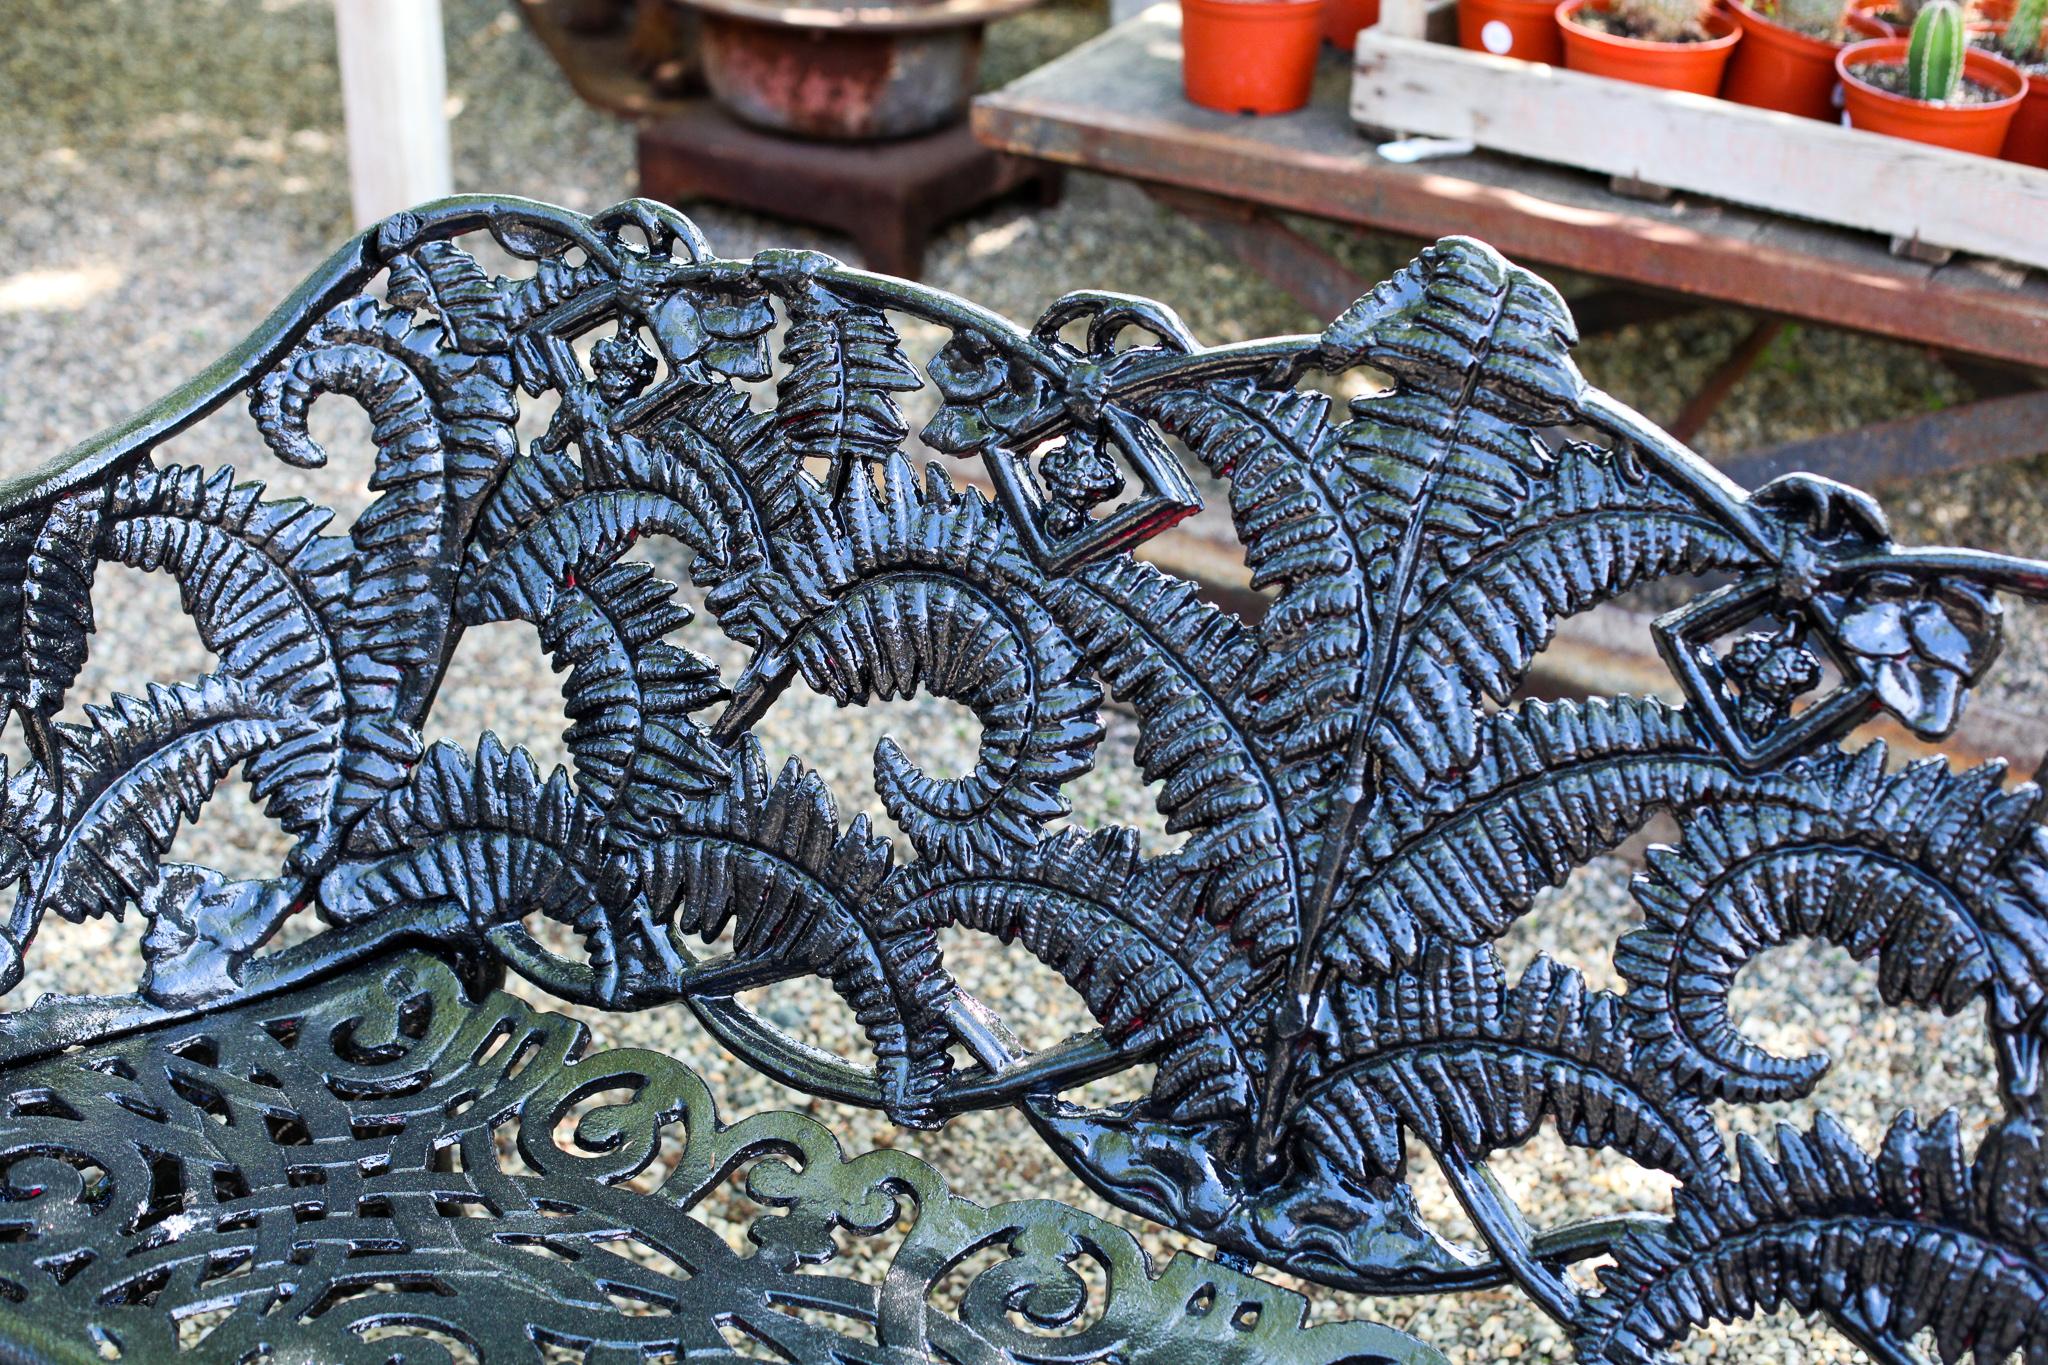 Harkening back from the Age of Innocence of the Edwardian Era, these benches will add a layer of sophistication to any garden space. Original castings with a fresh coat of black paint will modernize a space with a fresh take on old-world charm.